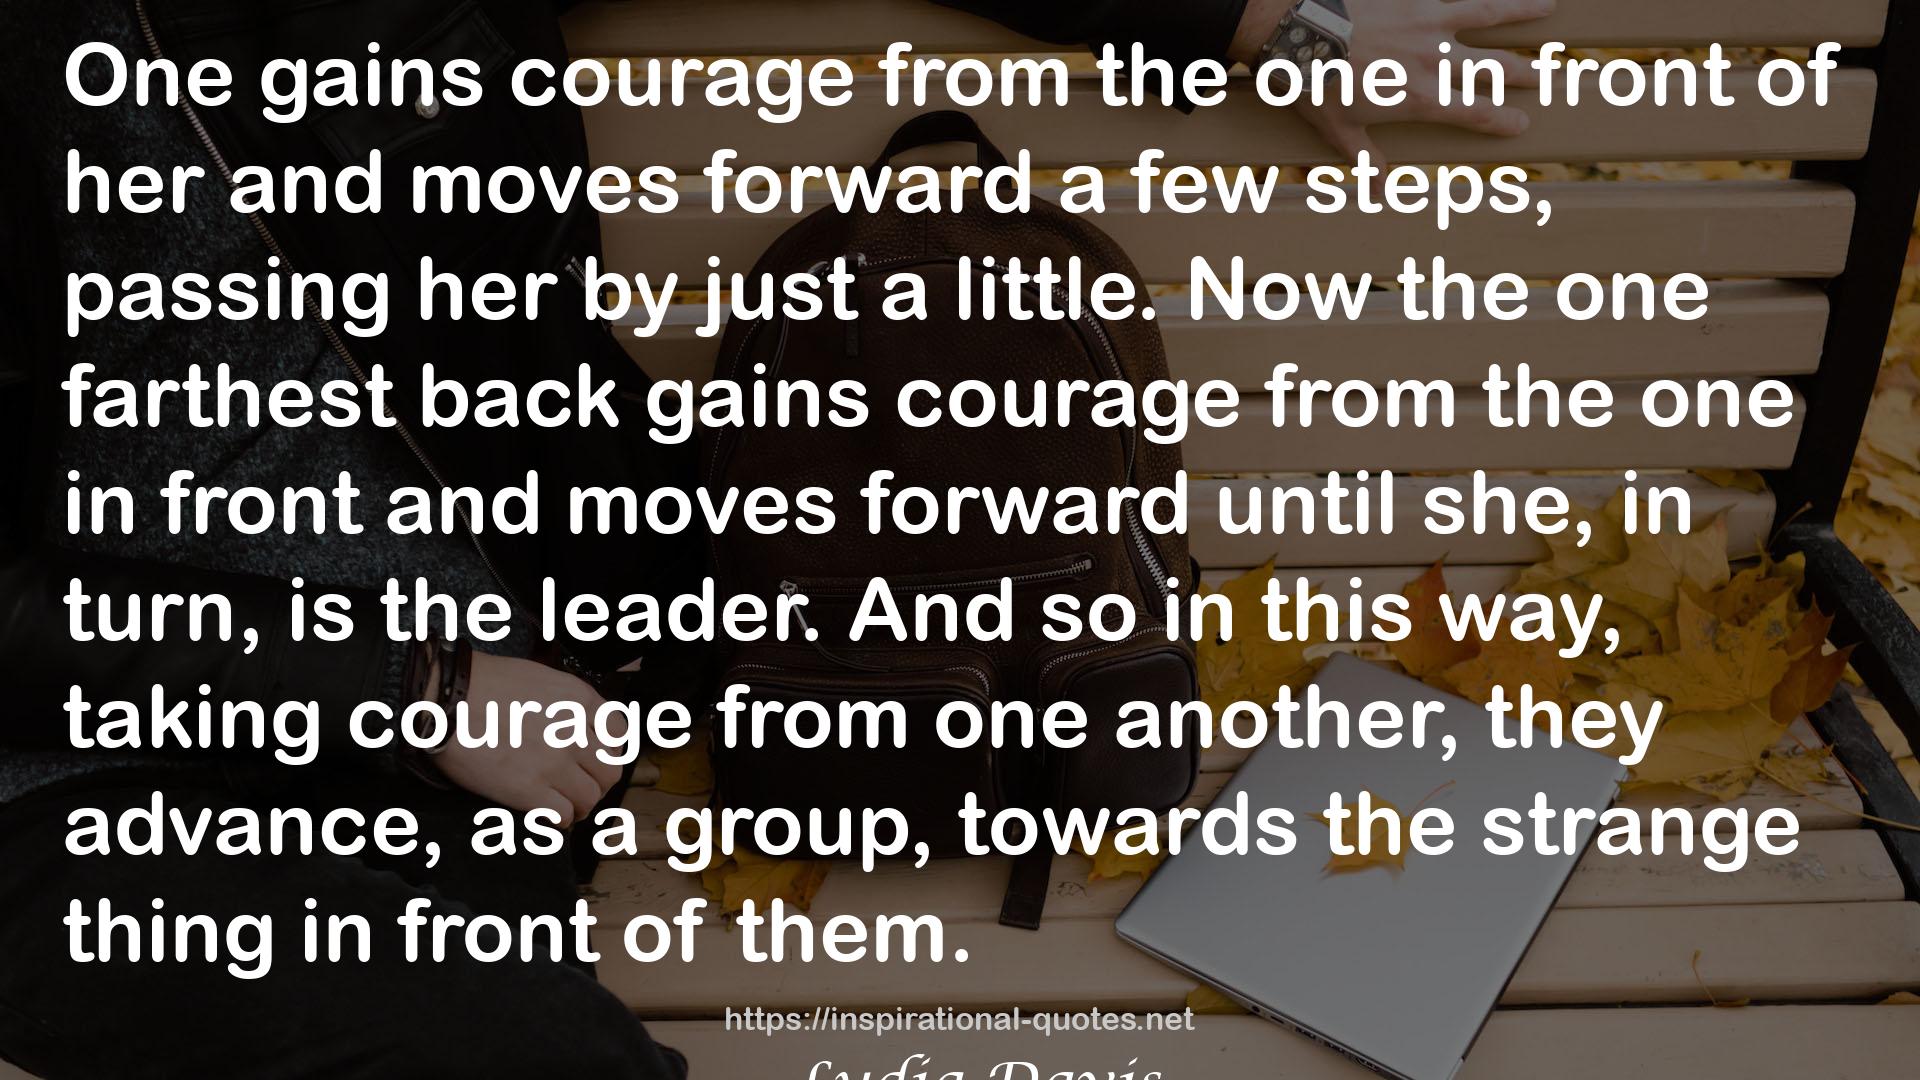 Now the one farthest back gains courage  QUOTES